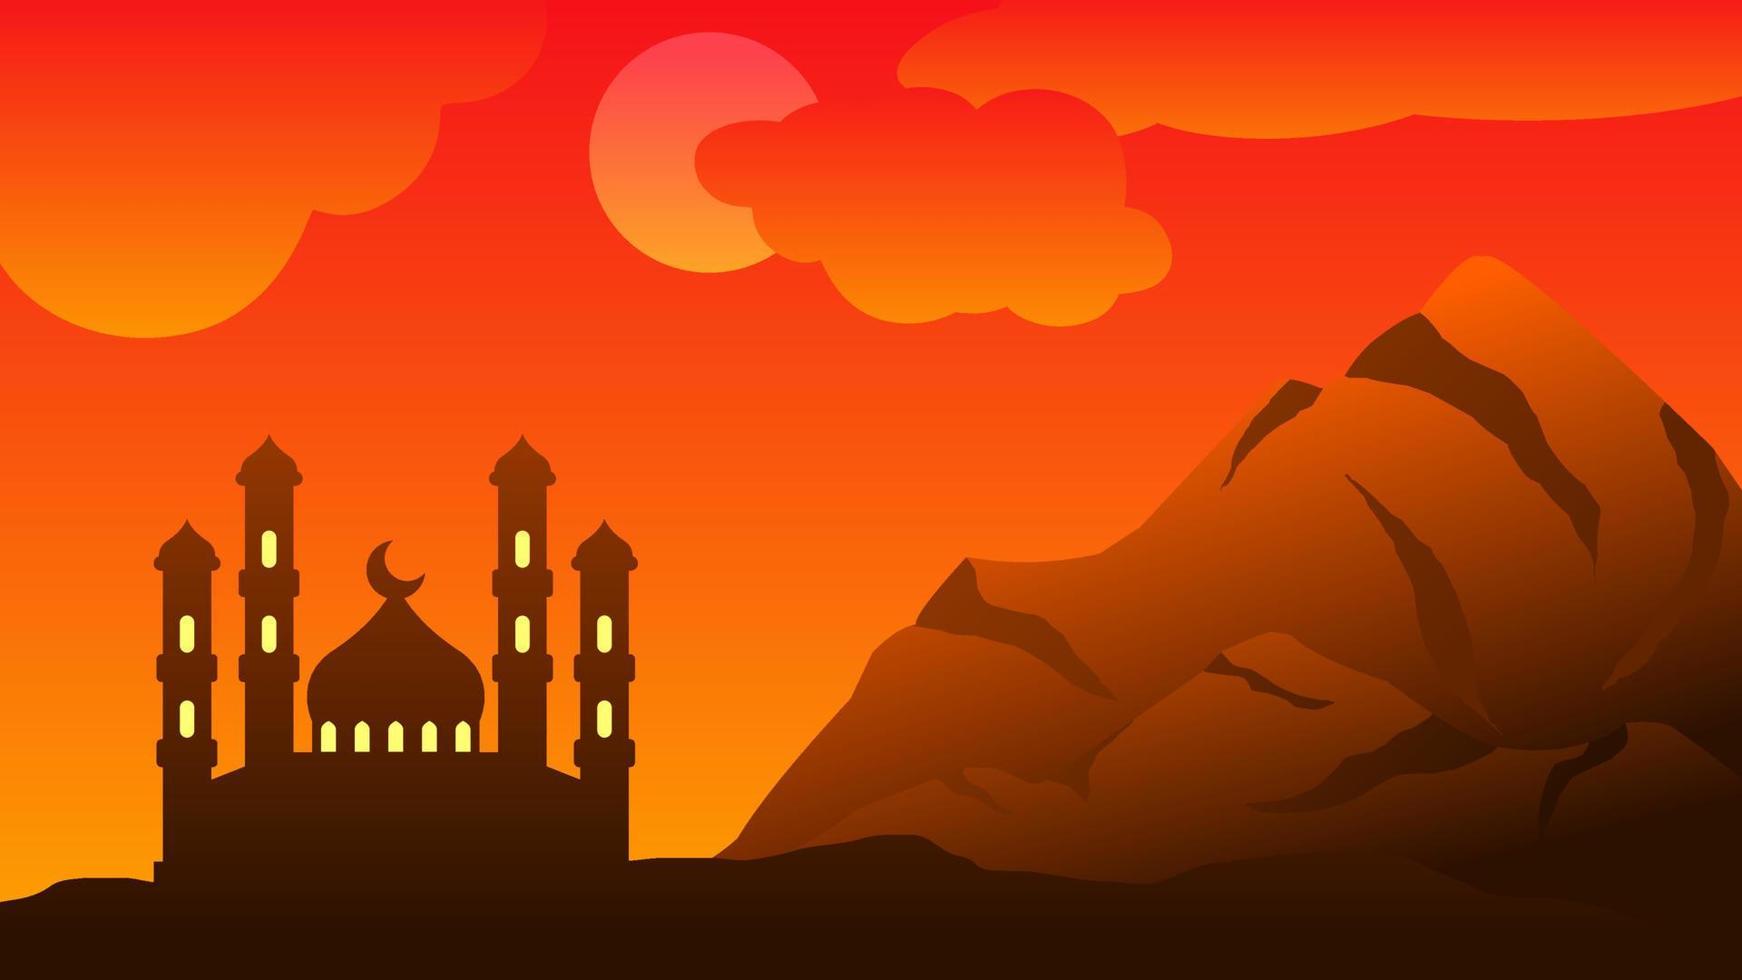 Background of silhouette mosque with orange sky for islamic design. Landscape element for design graphic ramadan greeting in muslim culture and islam religion. Ramadan wallpaper of mountain and hill vector